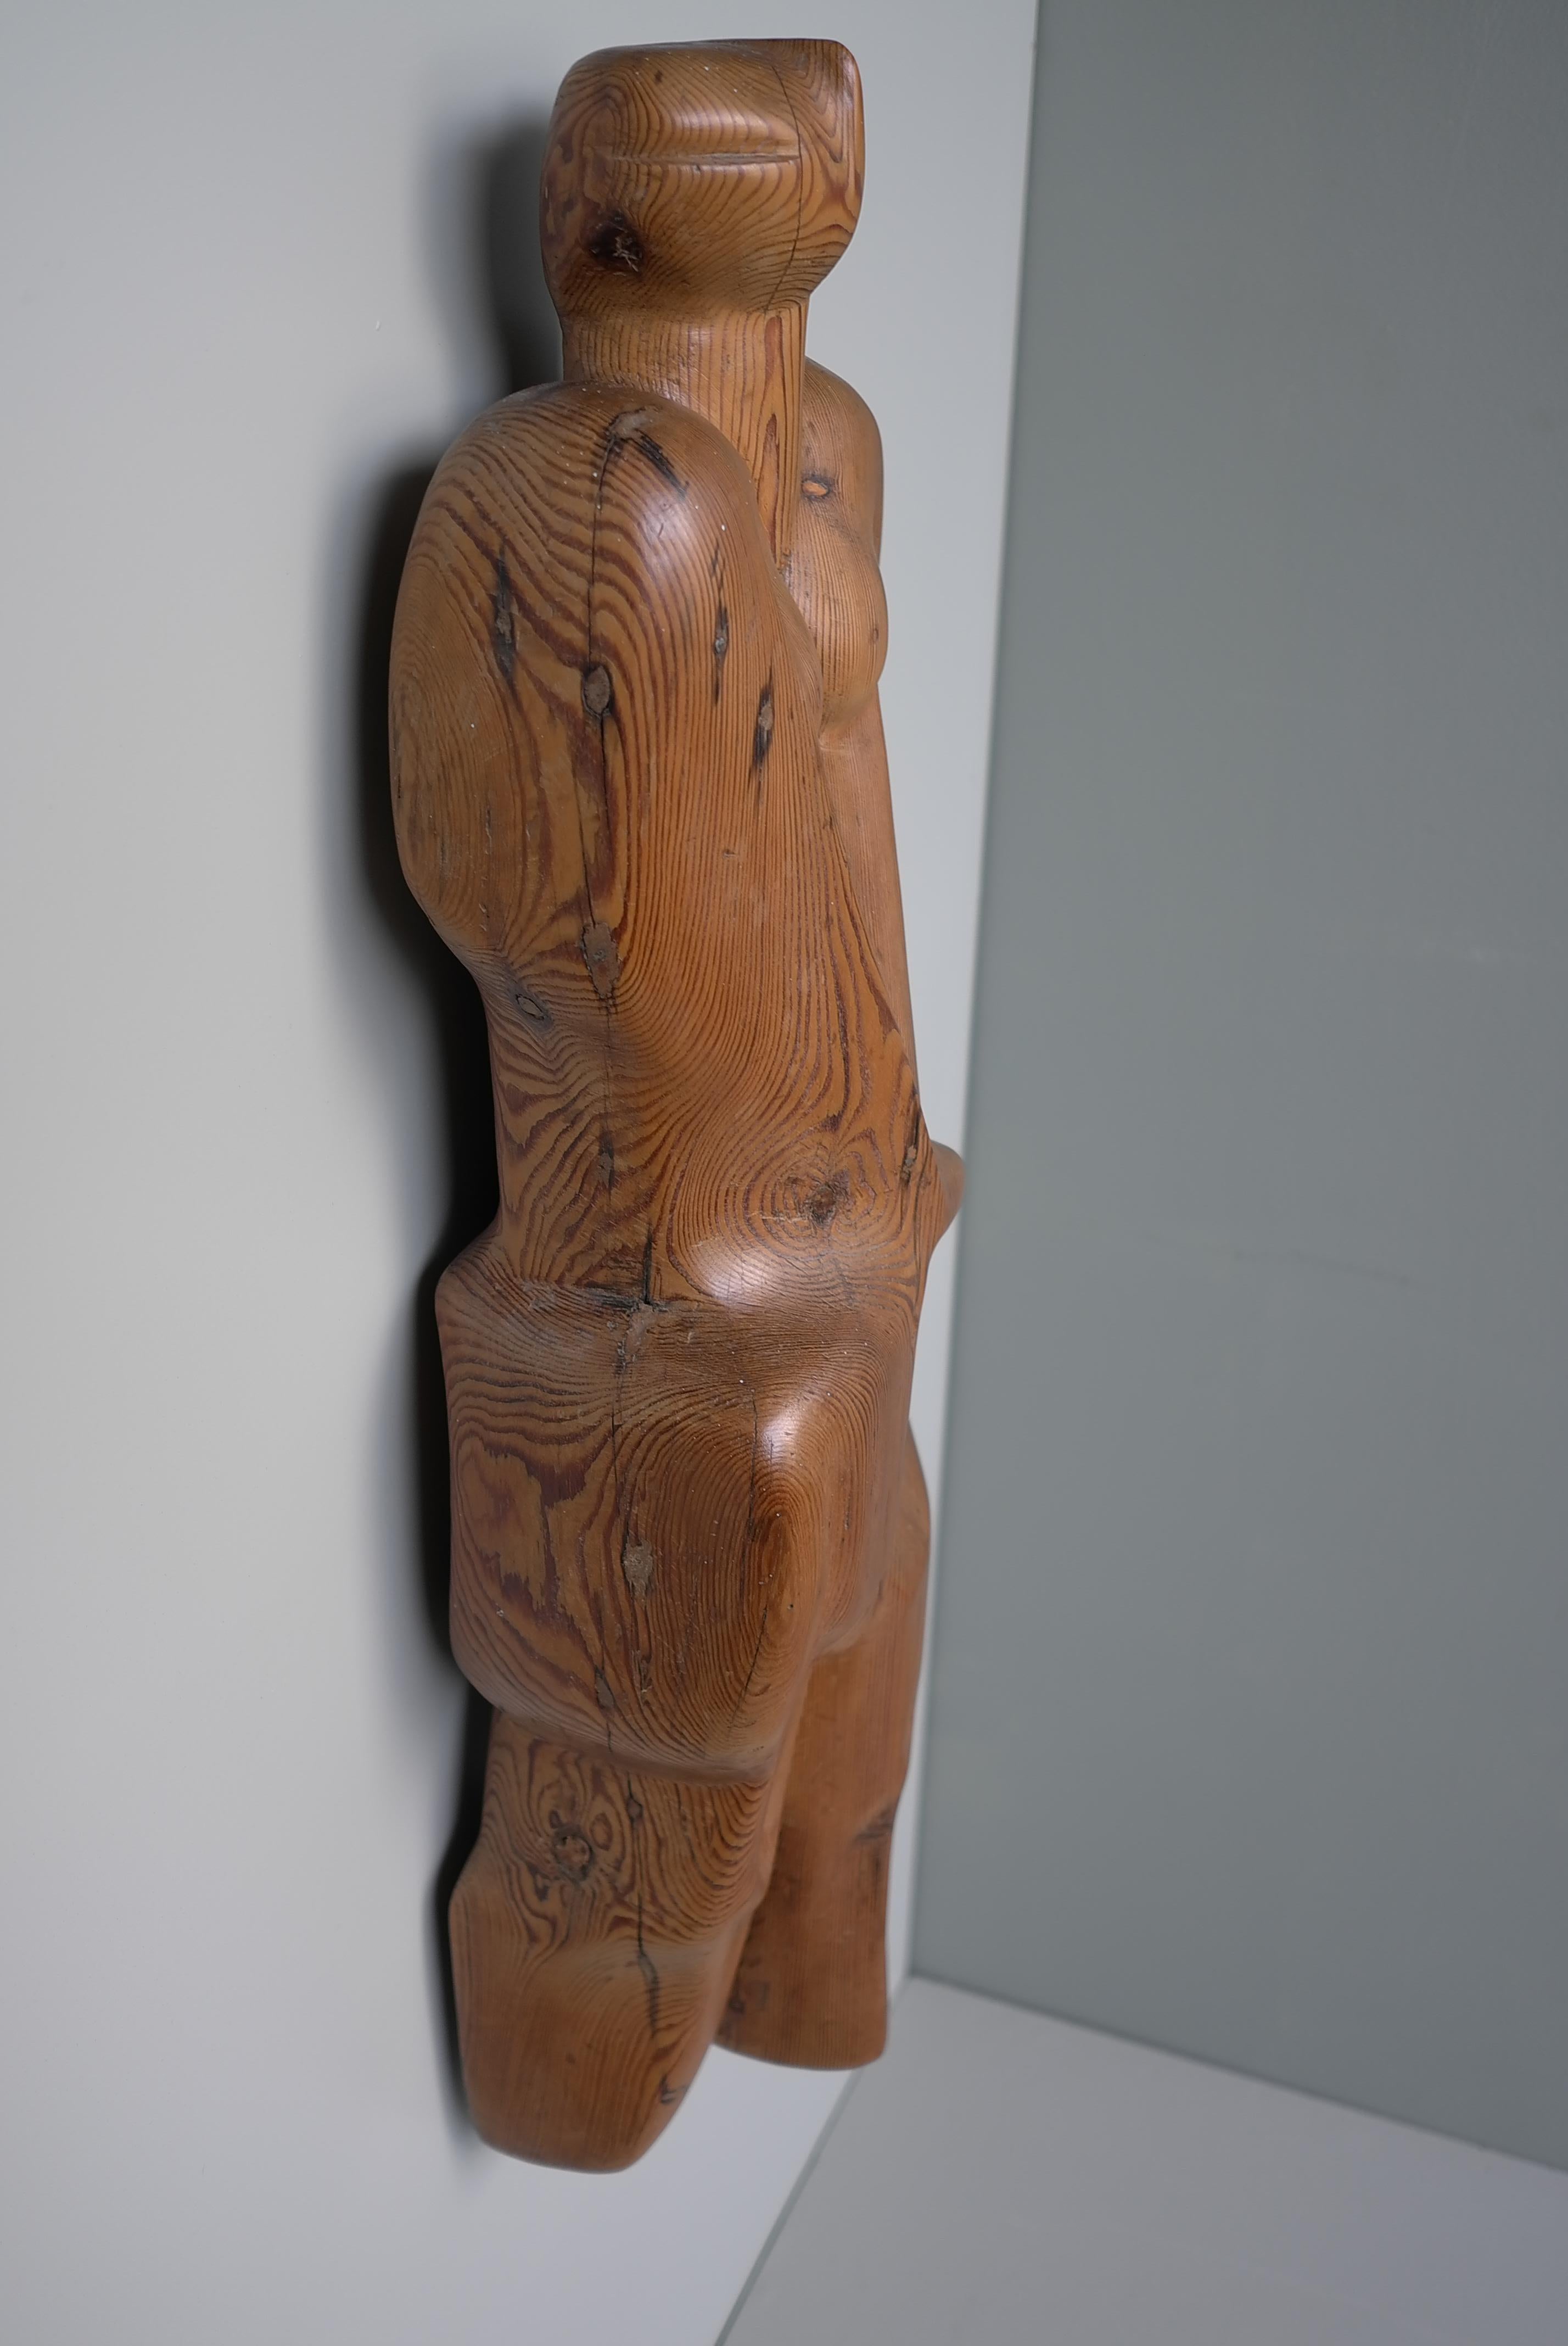 Mid-20th Century Abstract Wooden Wall Art , Women Figure by Cor Dam, Delft The Netherlands 1958 For Sale